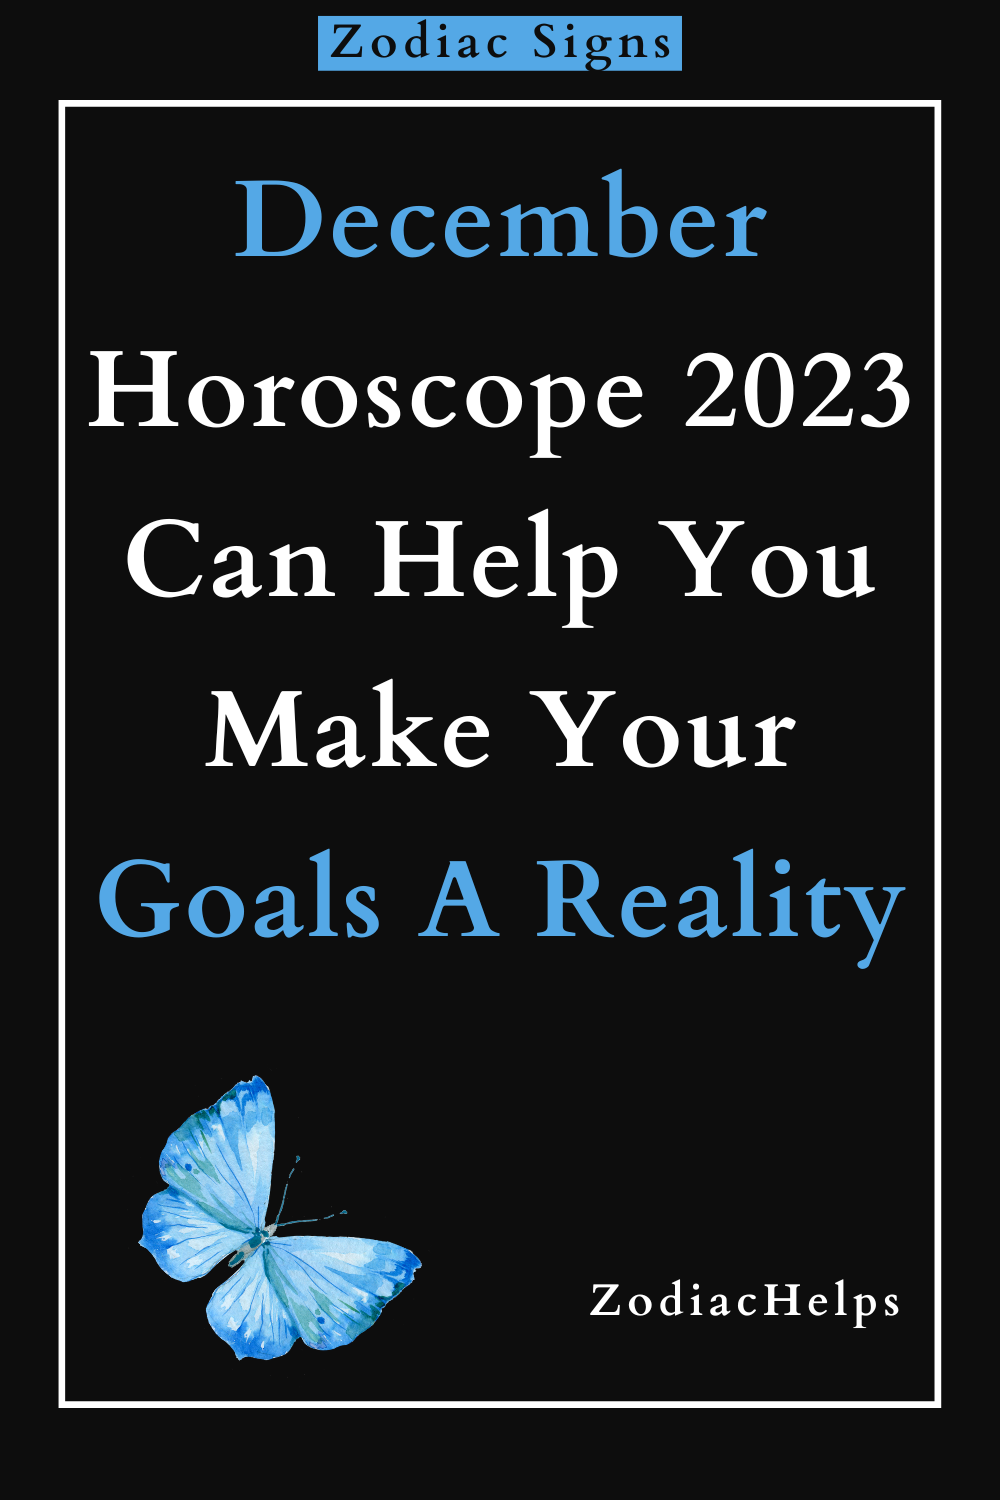 December Horoscope 2023 Can Help You Make Your Goals A Reality